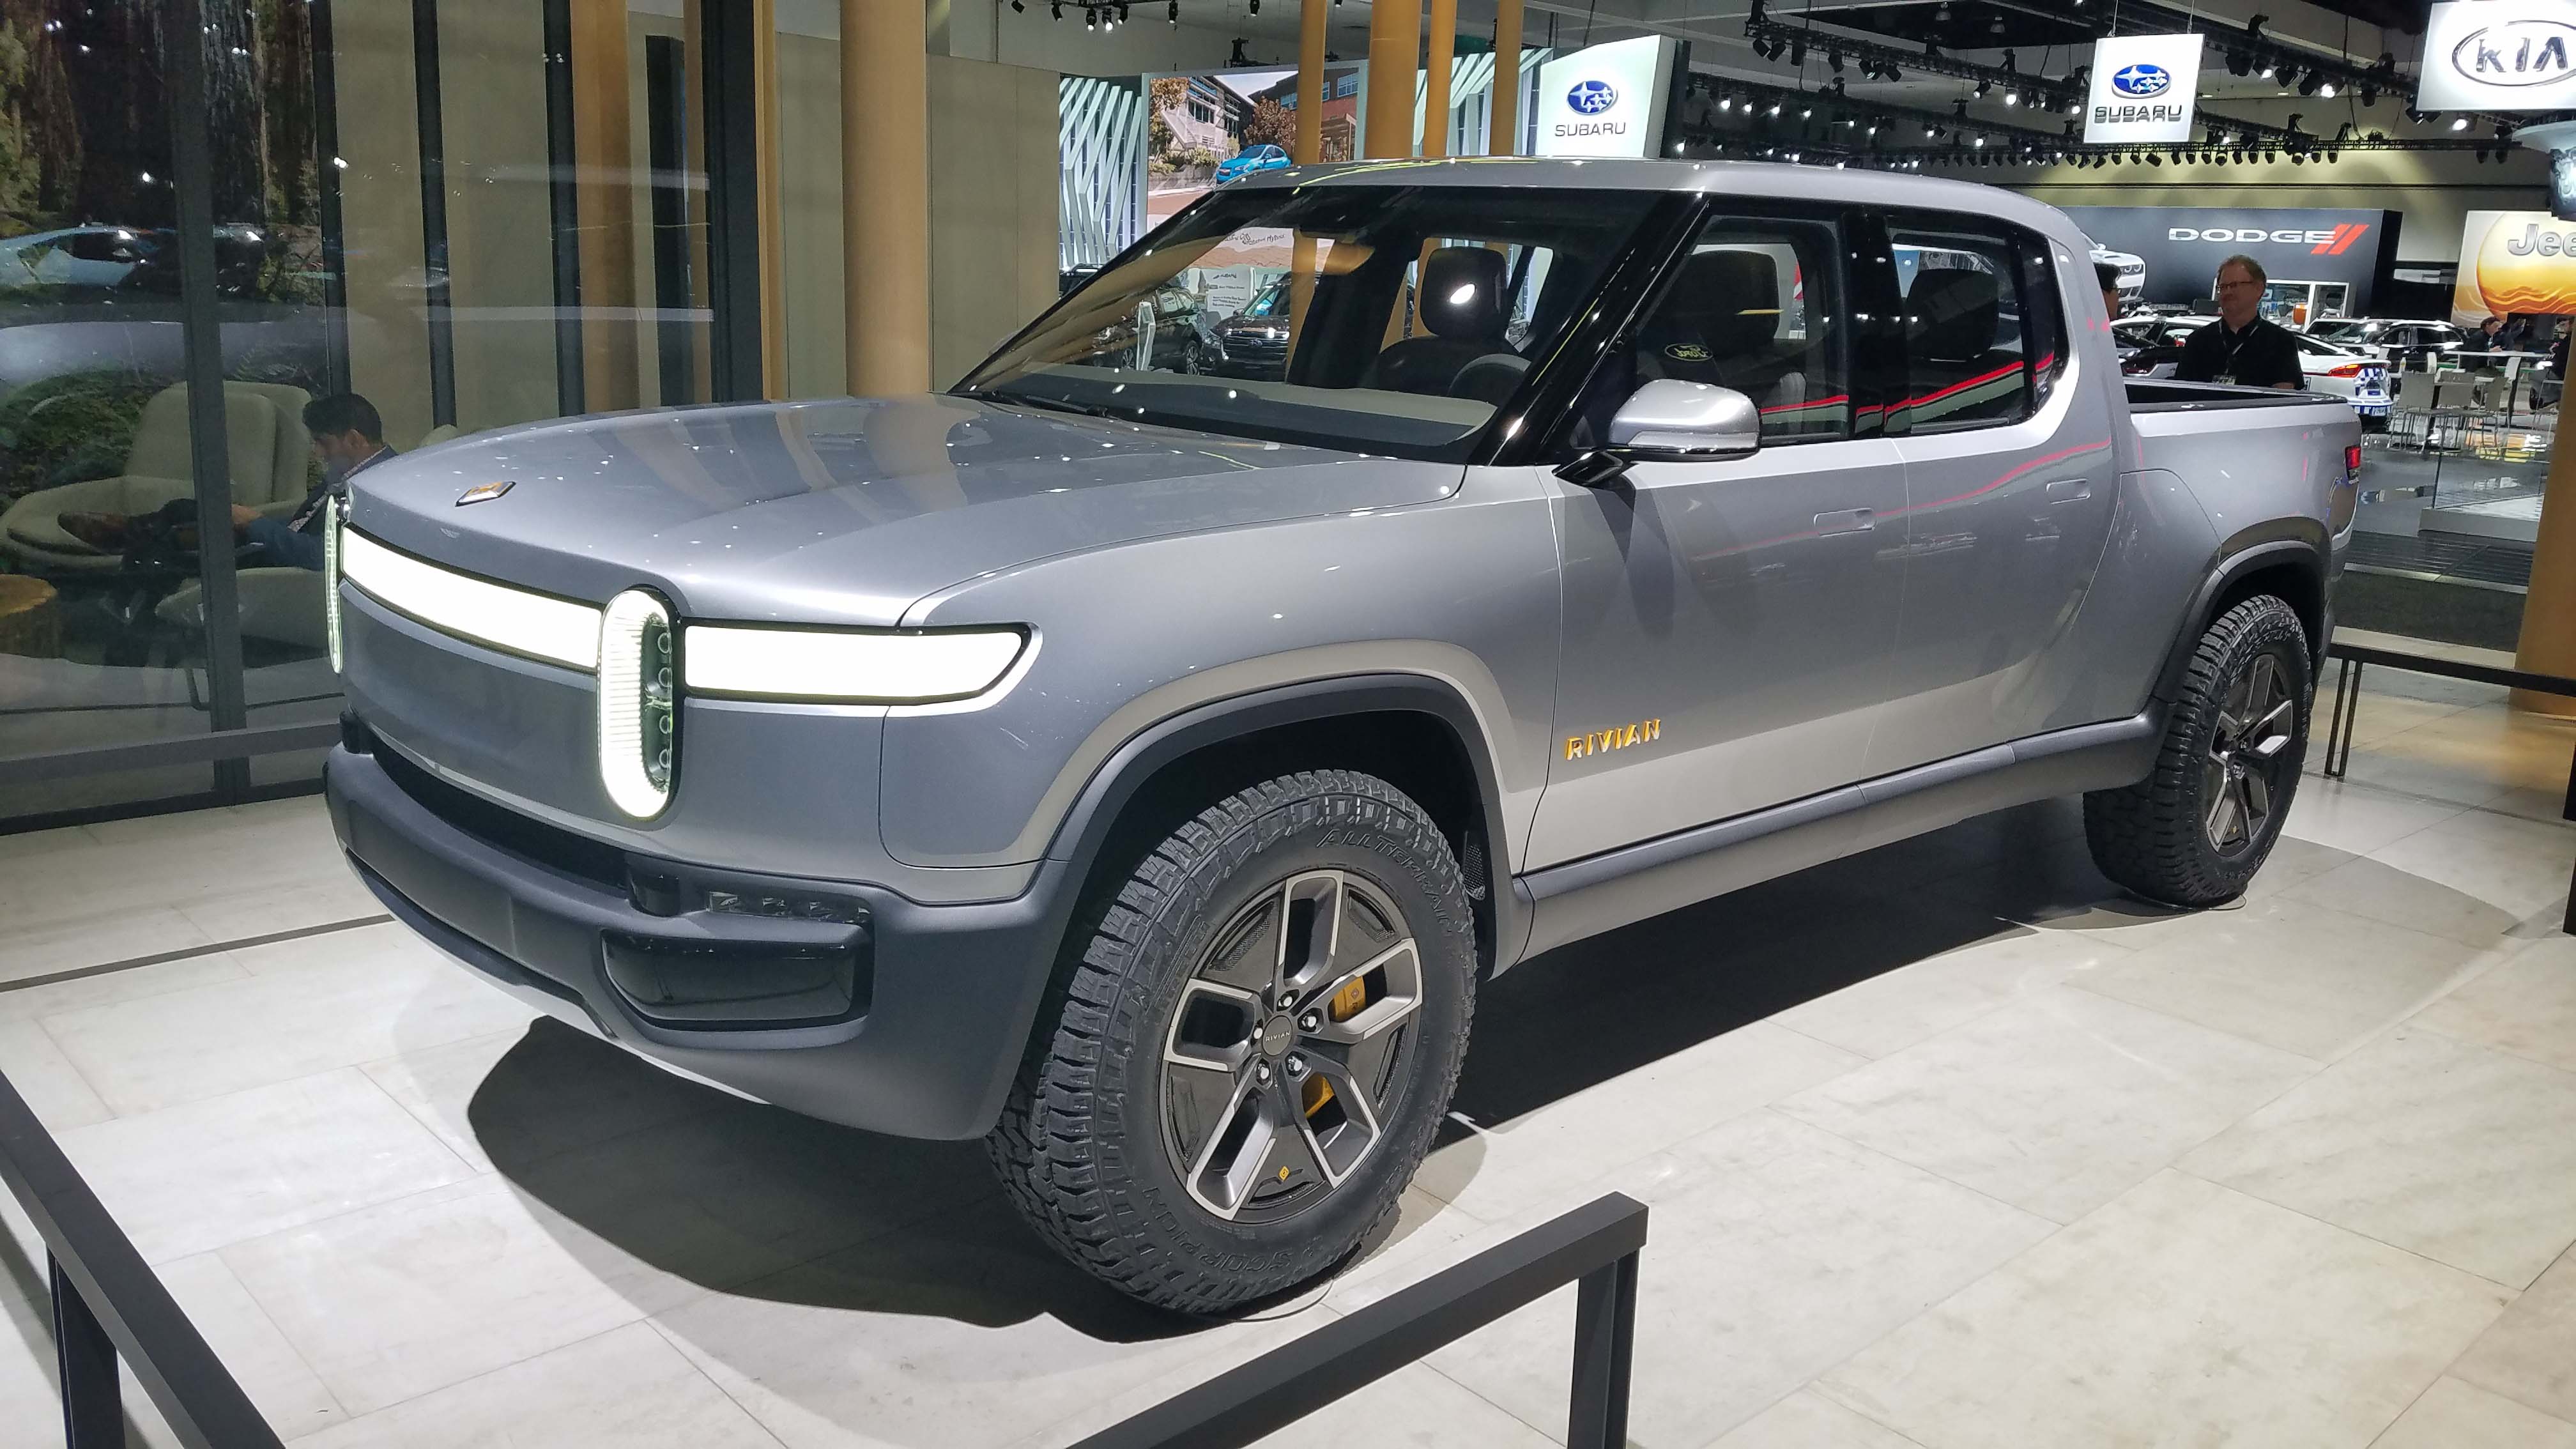 Electric truckmaker Rivian introduced the R1T pickup EV at the Los Angeles auto show last November. GM and Amazon are reportedly negotiating an investment stake in the automaker.